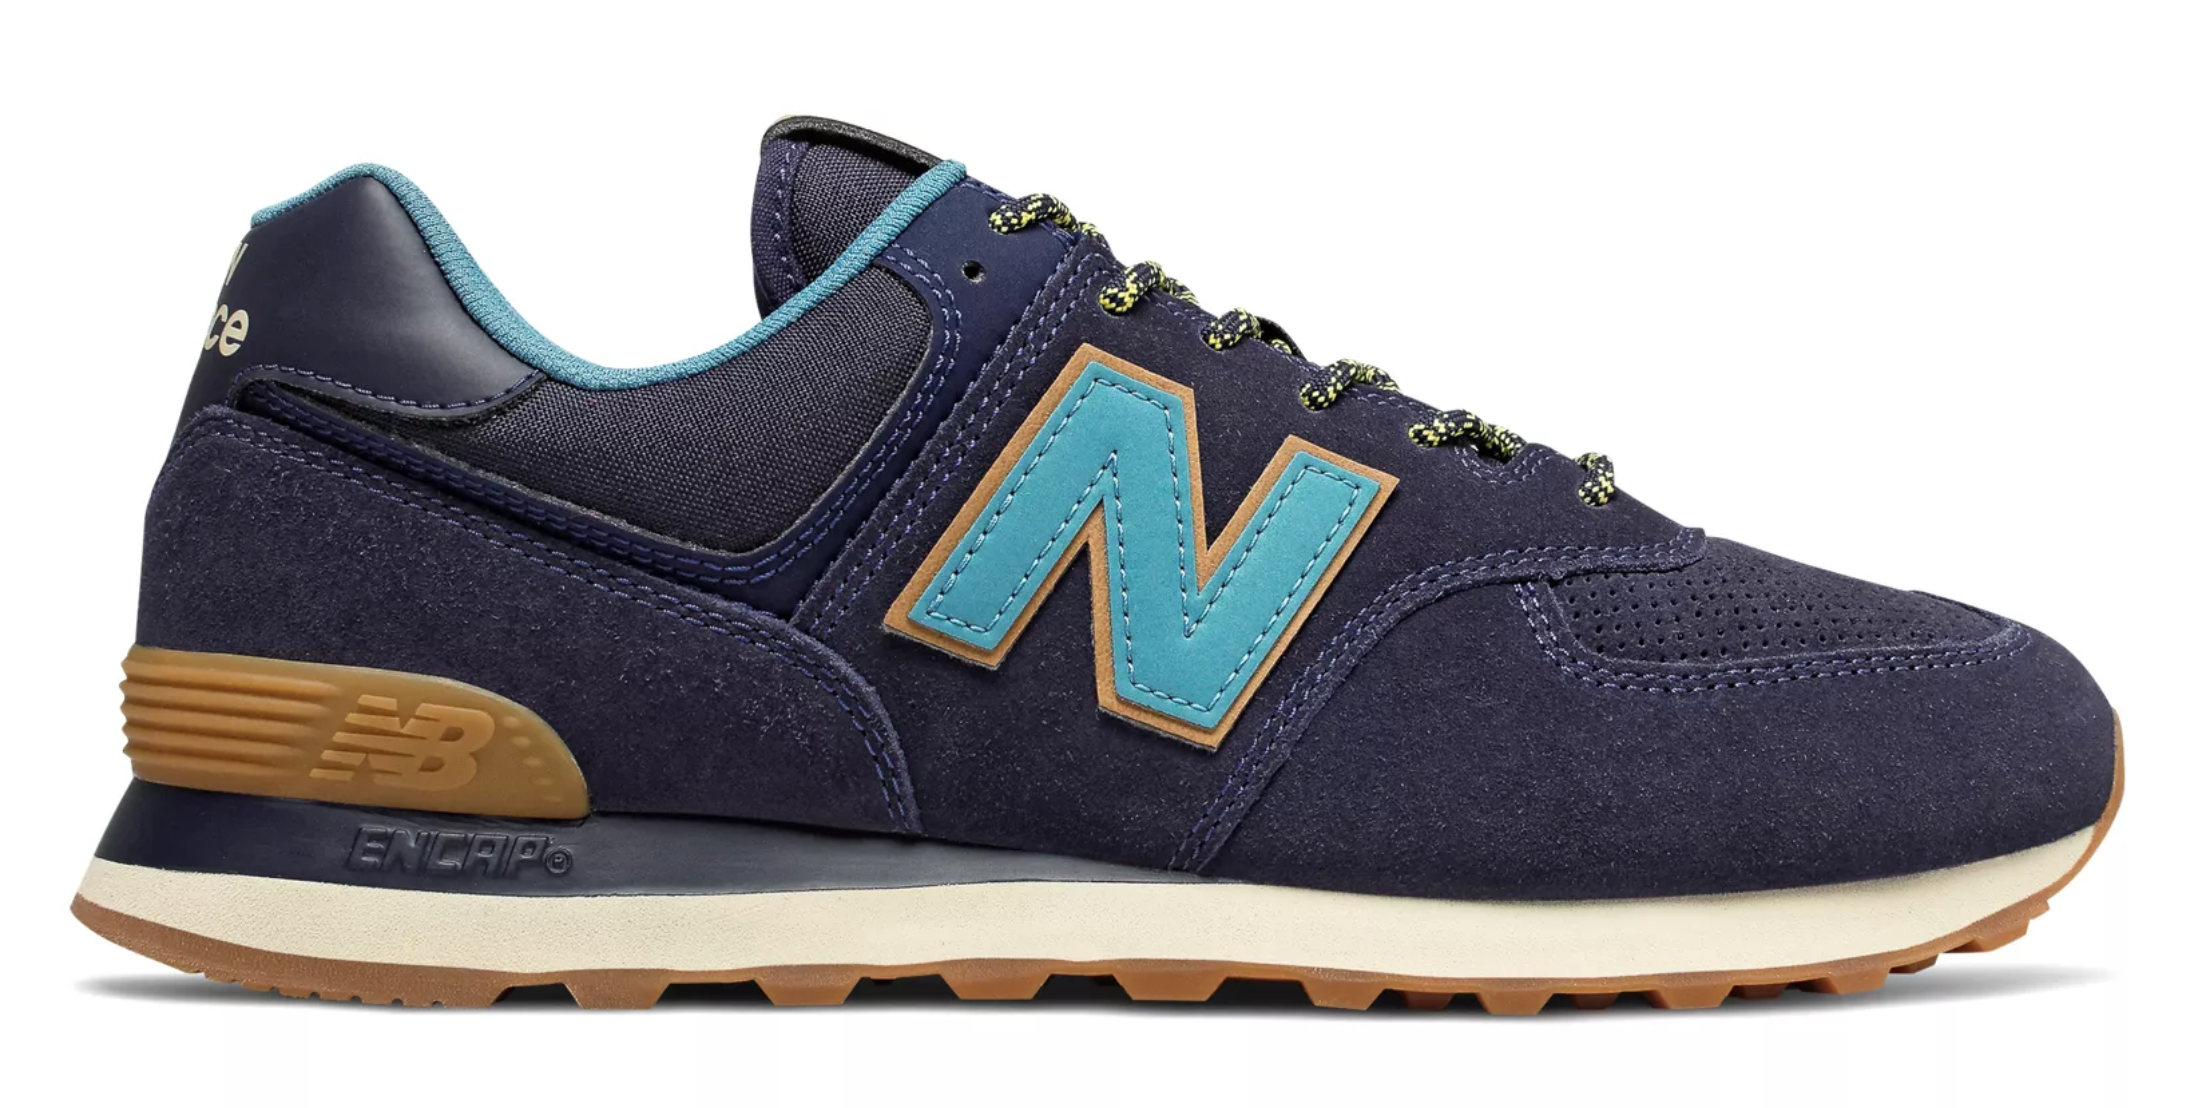 New Balance 574 Shoes - Latest Styles and Best Deals ساعات بولو